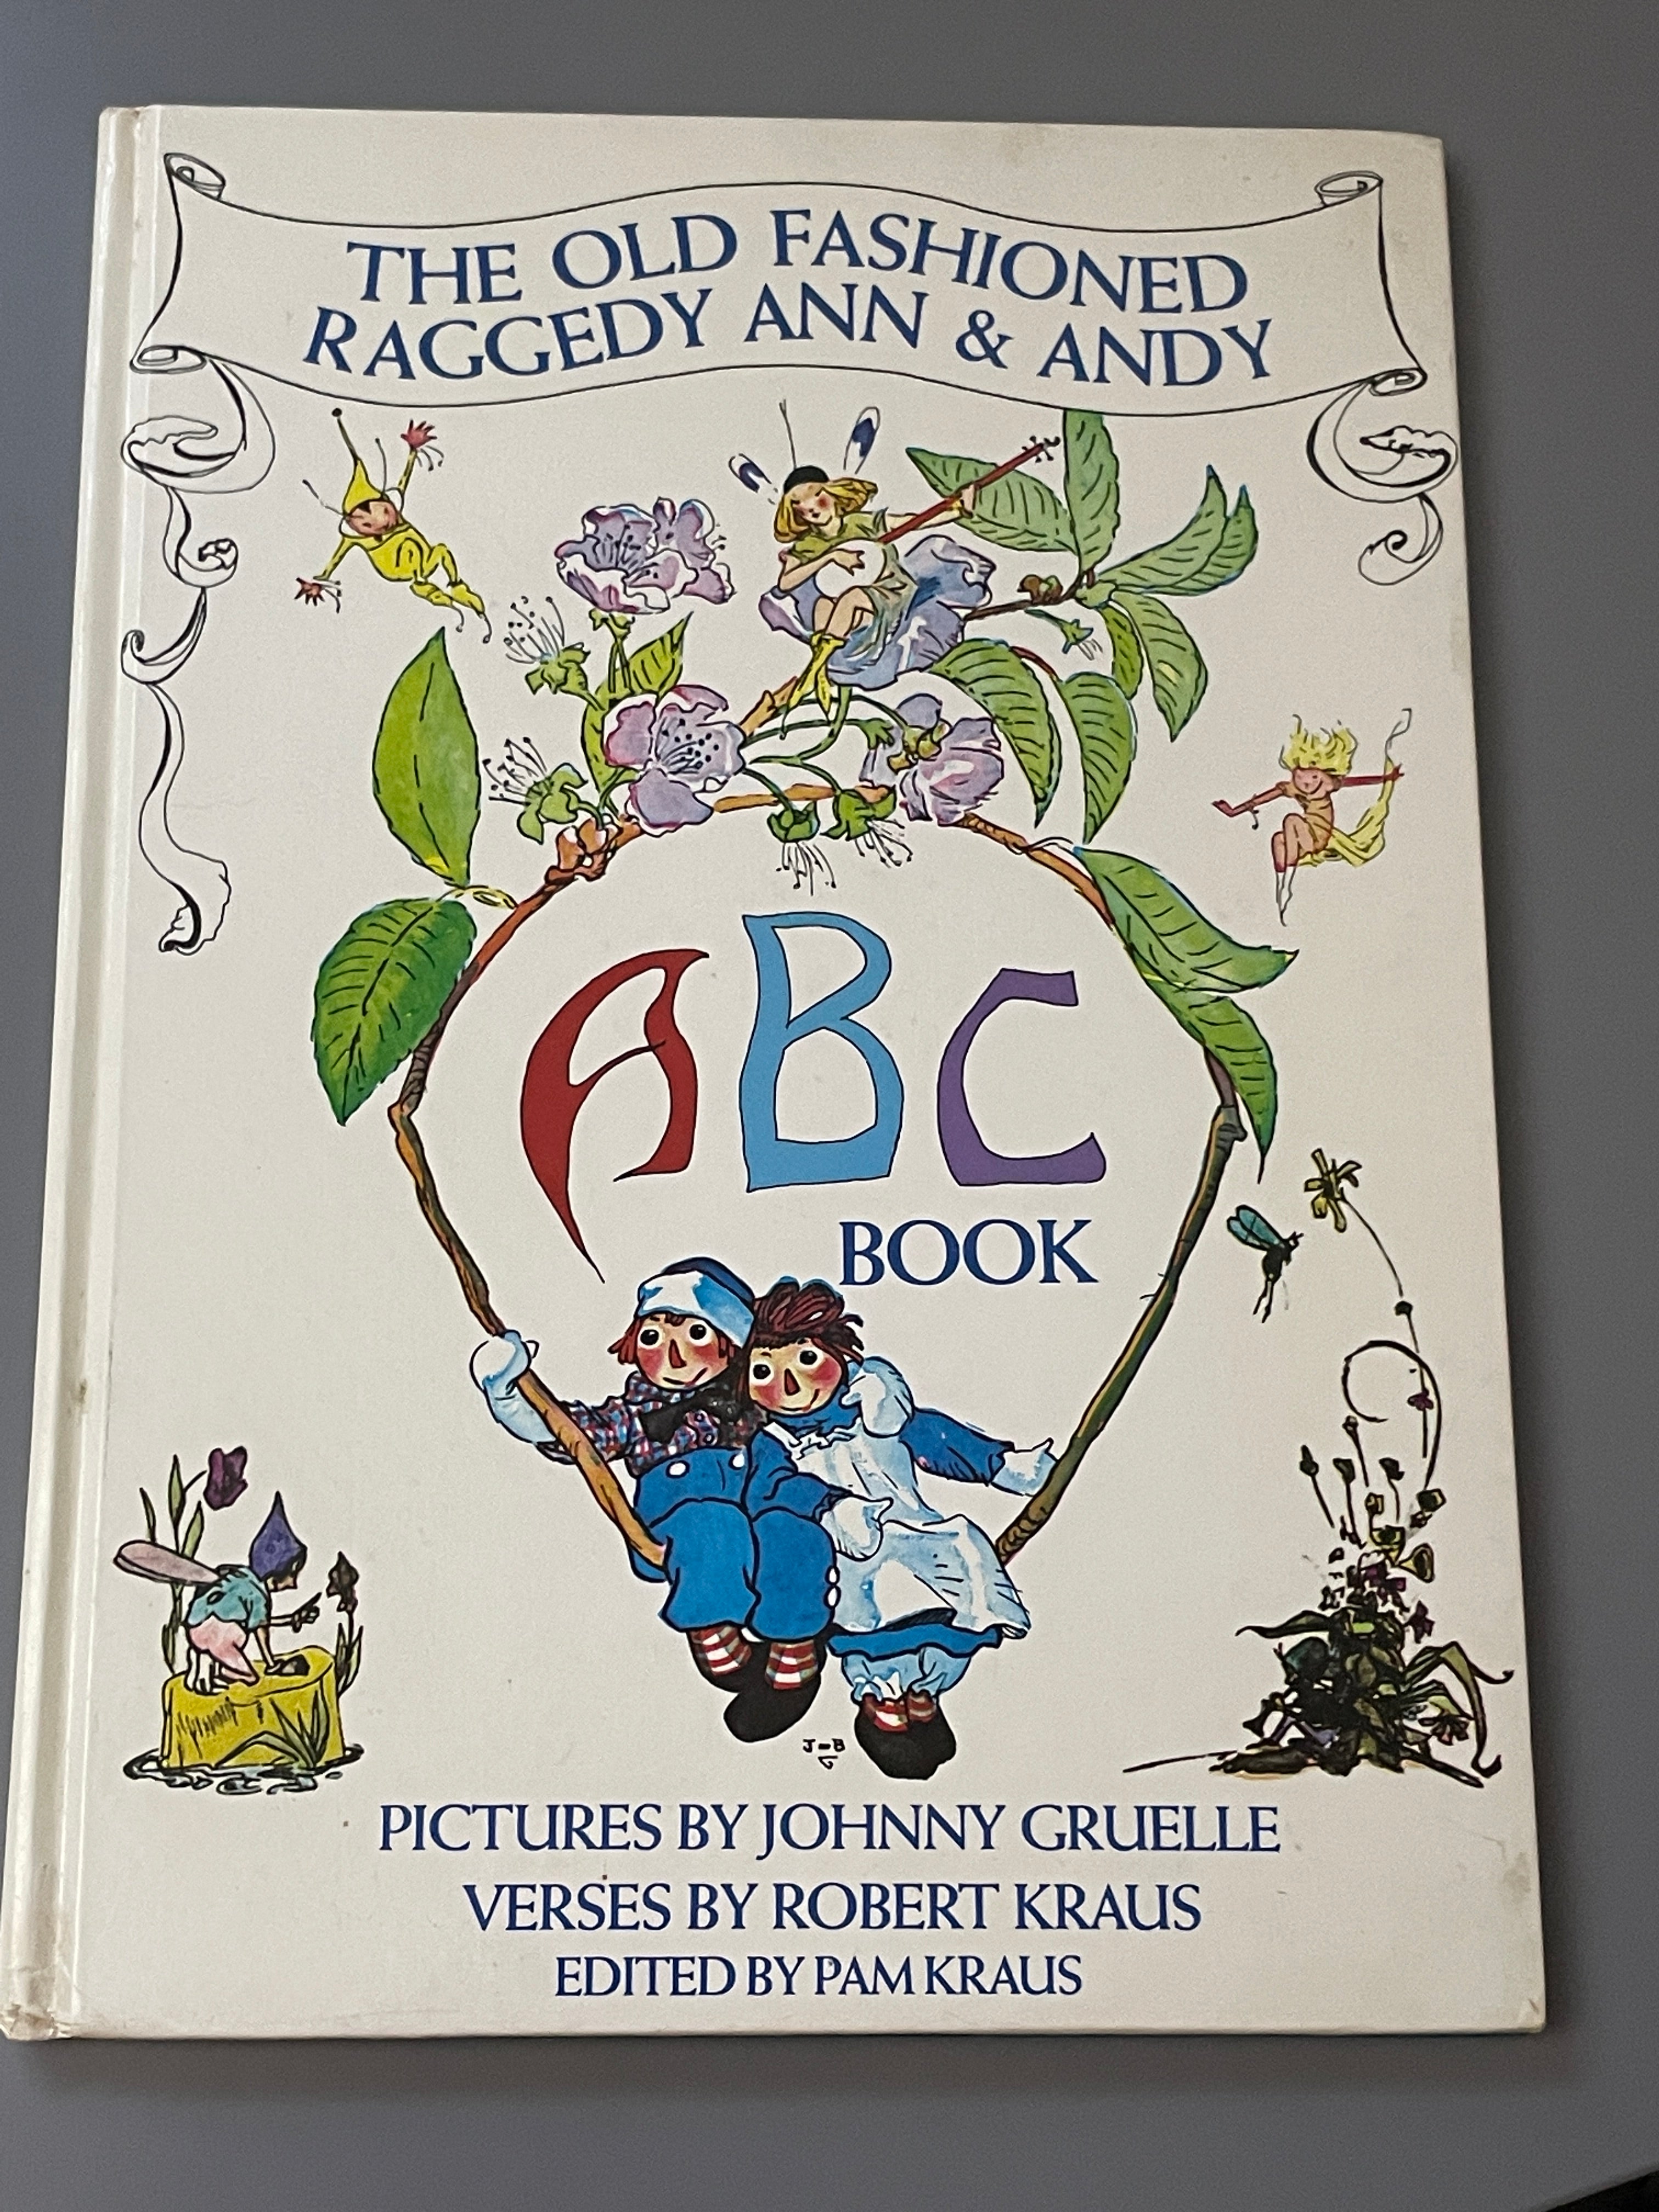 The Old-Fashioned Raggedy Ann & Andy ABC Book by Robert Kraus (1981) S – Ex Libris Used Books